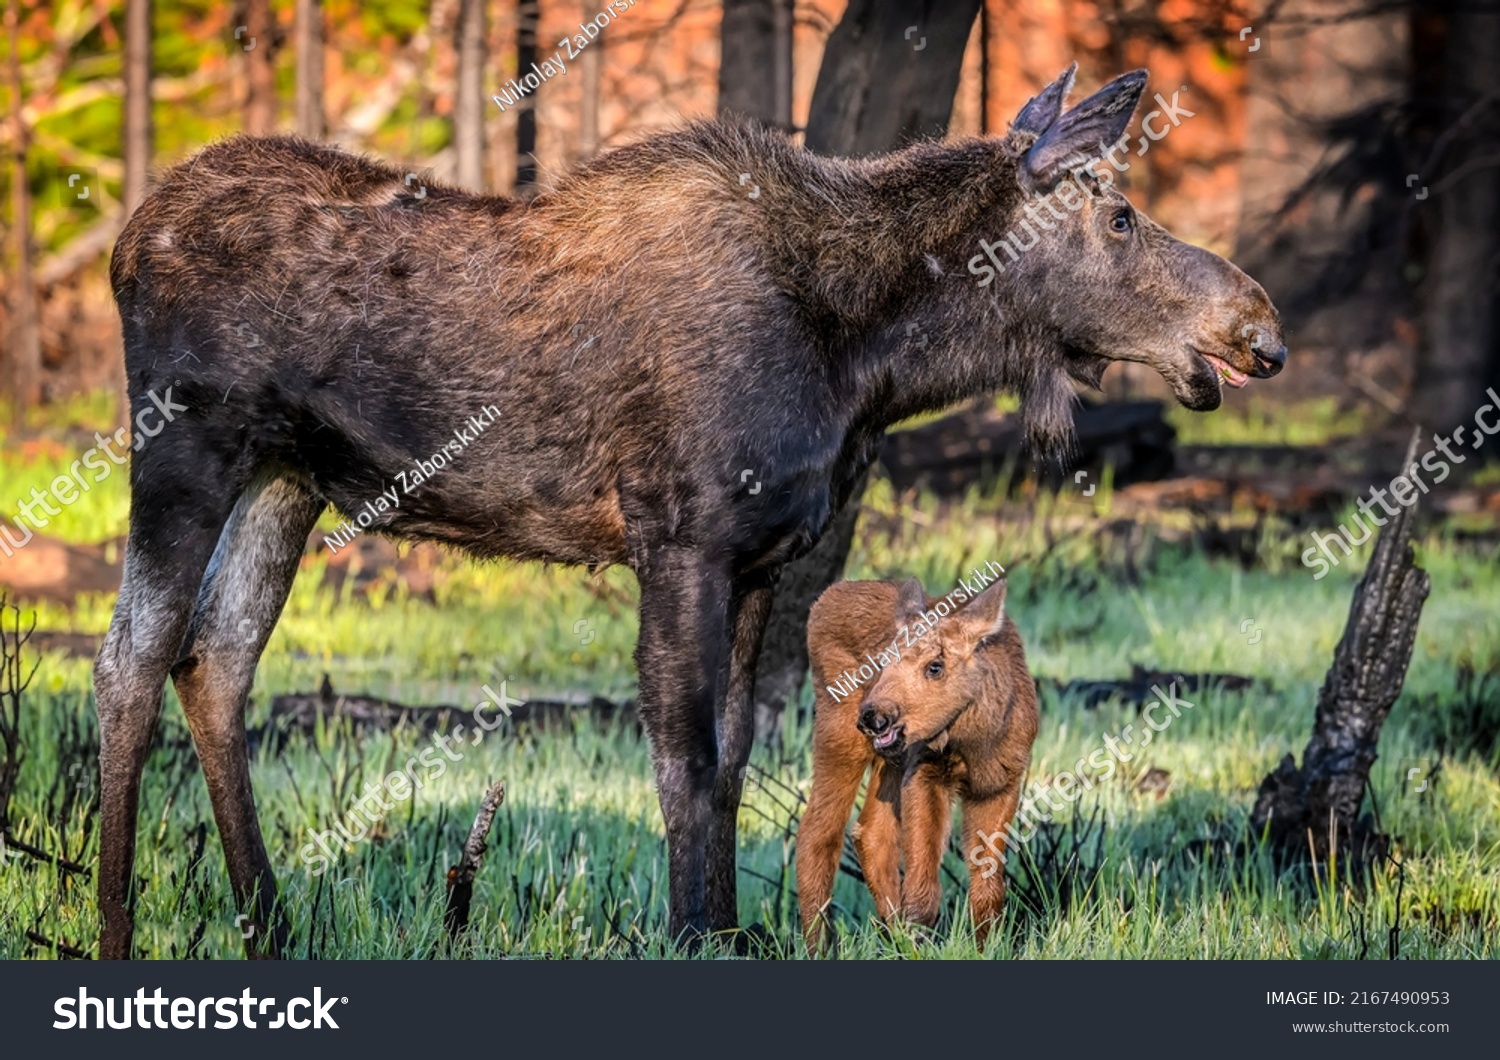 Moose mother with a small moose calf. Moose family in nature #2167490953